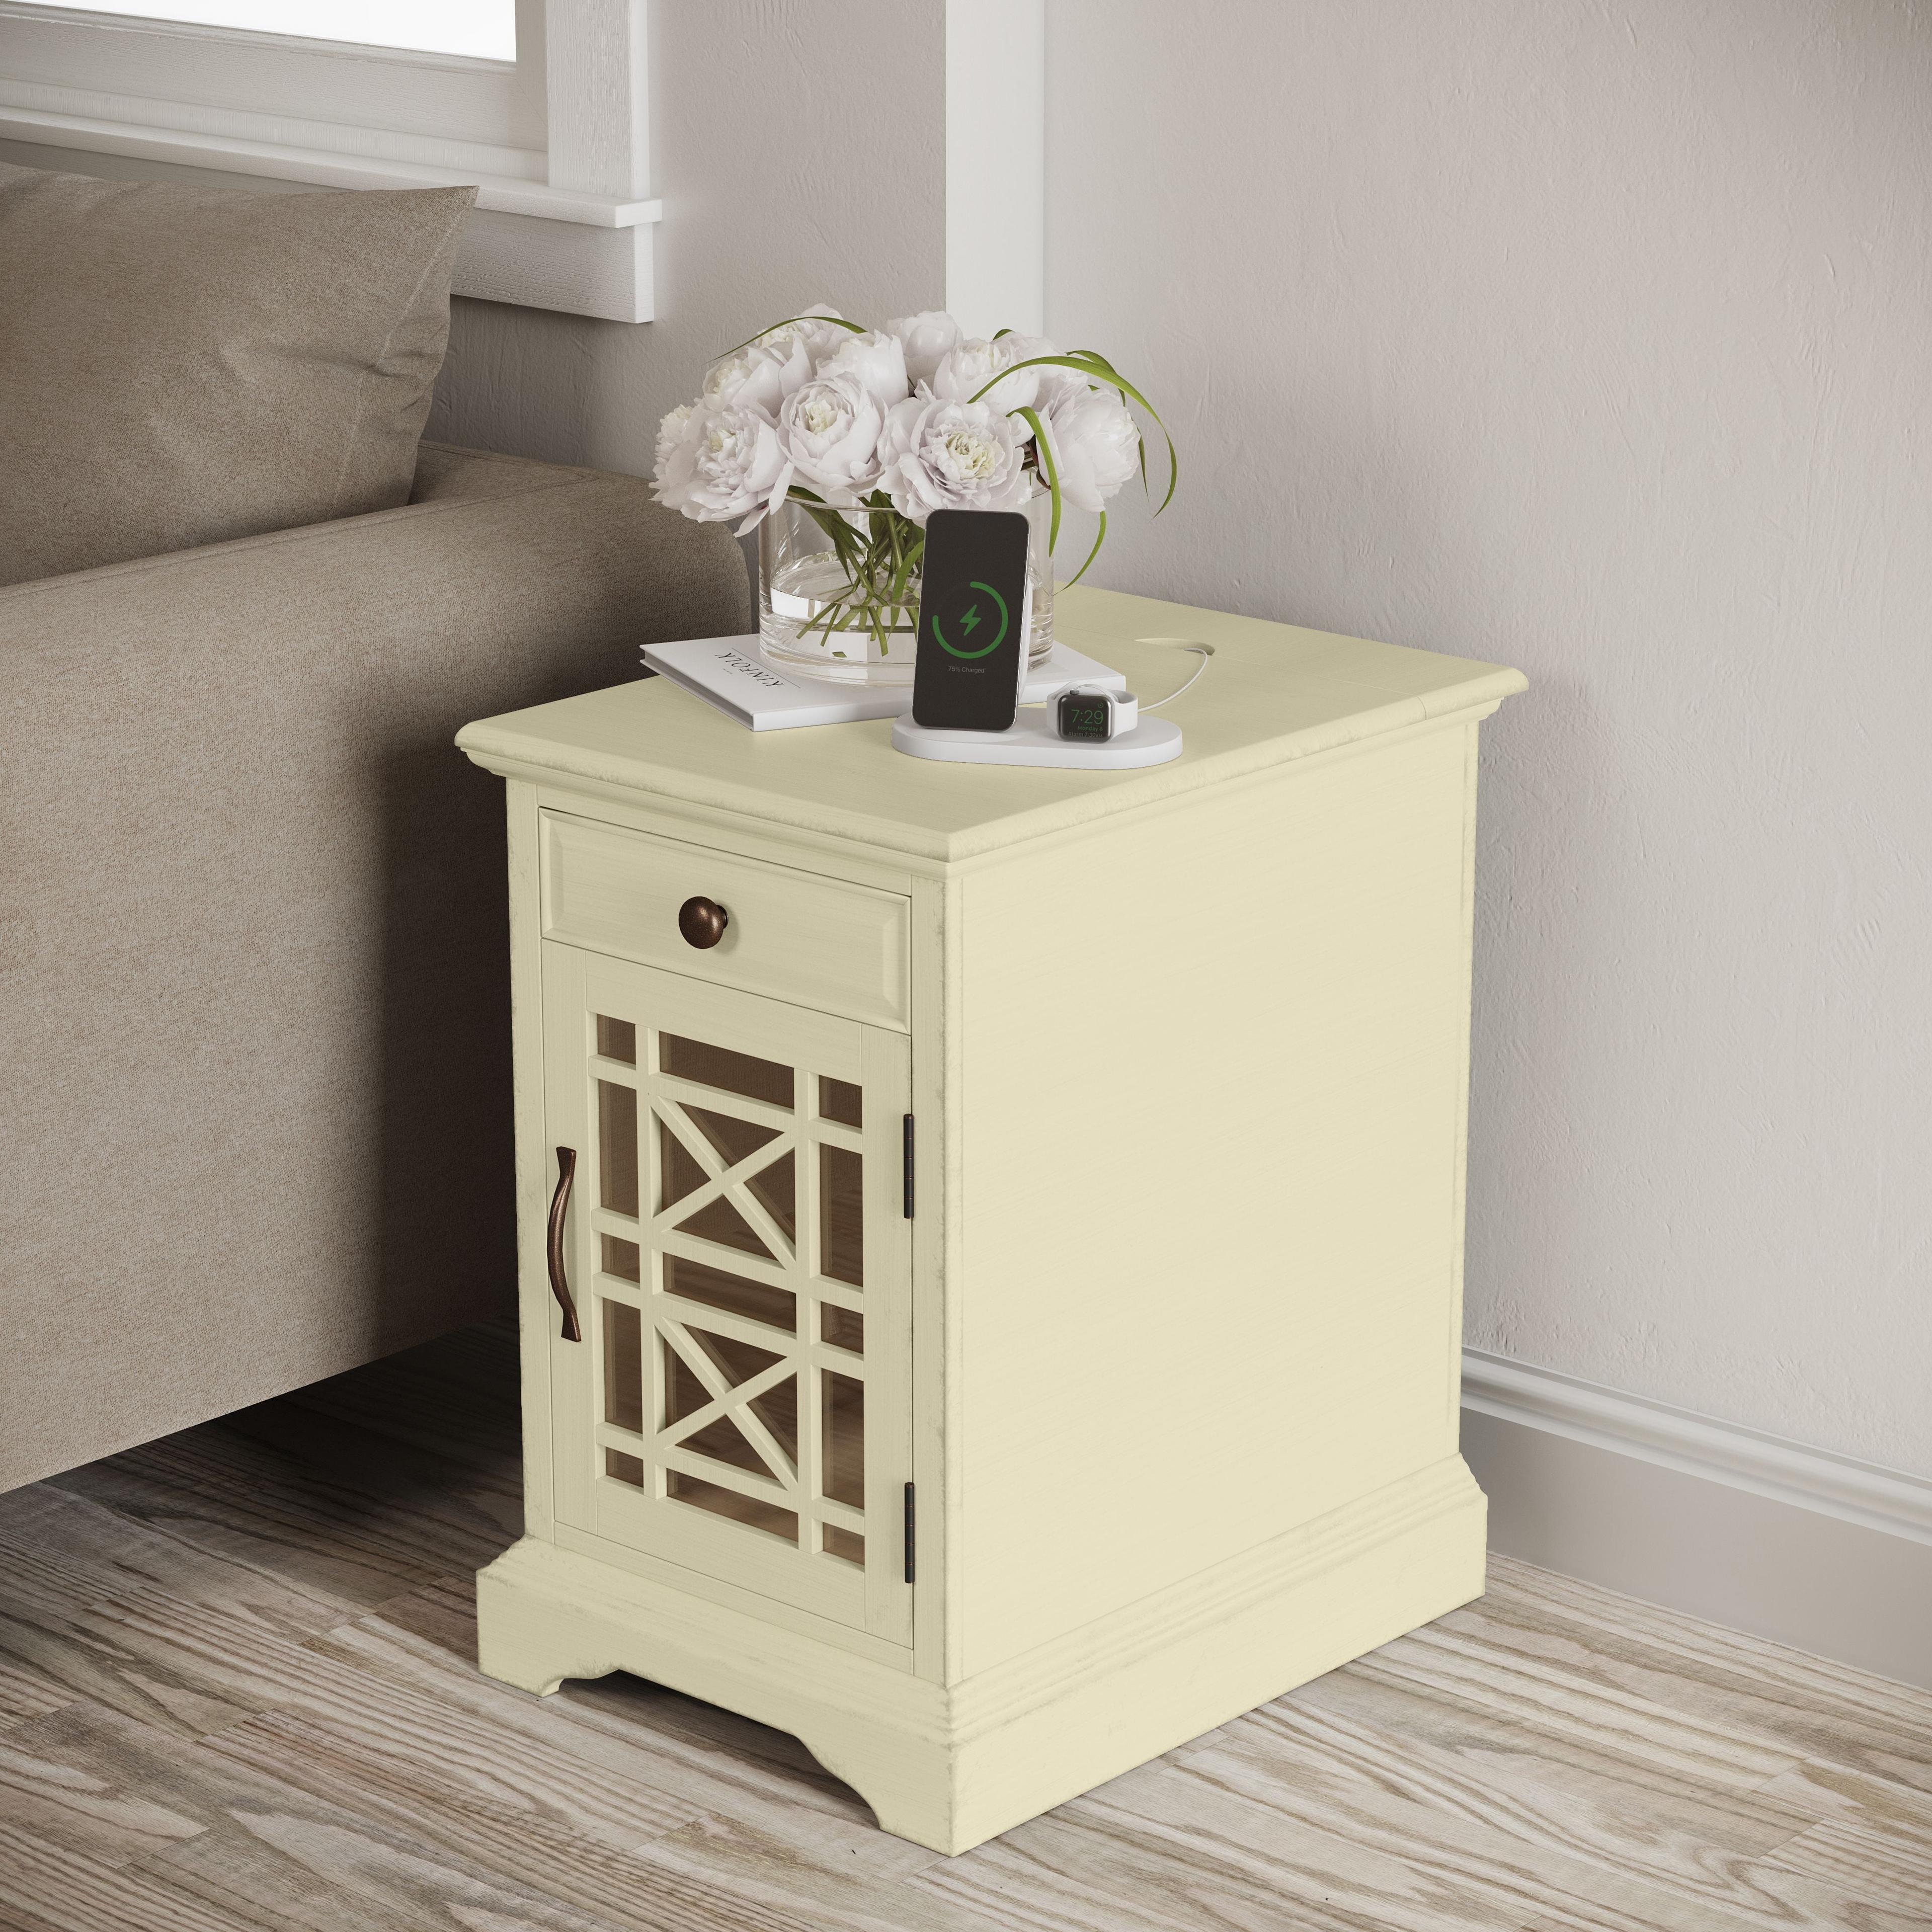 Transitional Cream Wood & Glass Chairside Table with USB Charging